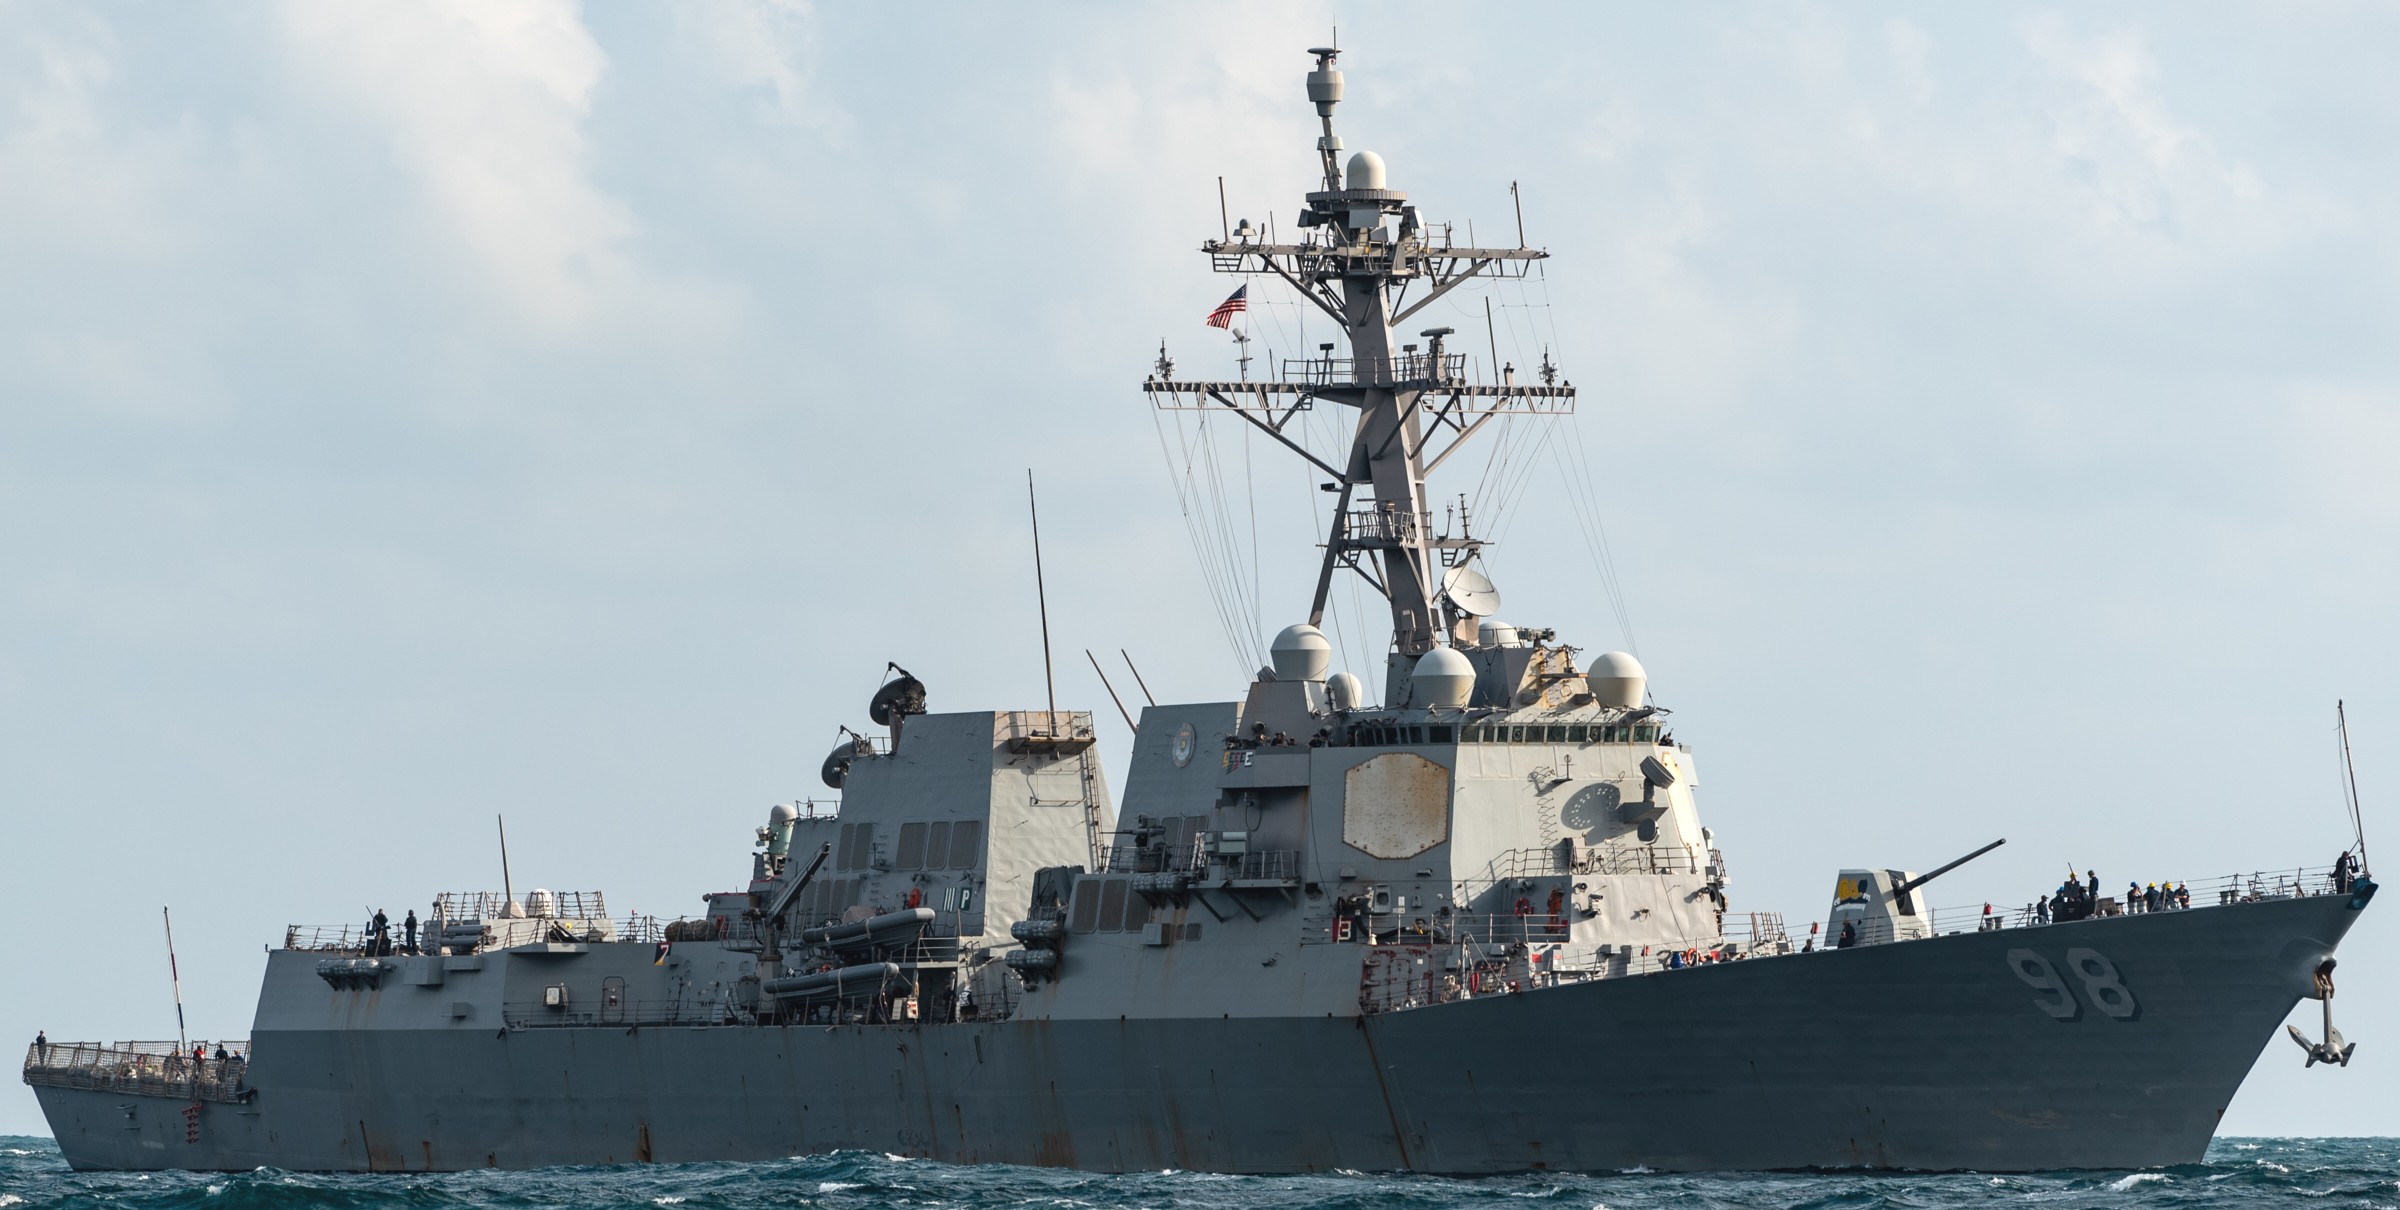 ddg-98 uss forrest sherman arleigh burke class guided missile destroyer aegis us navy djibouti 64